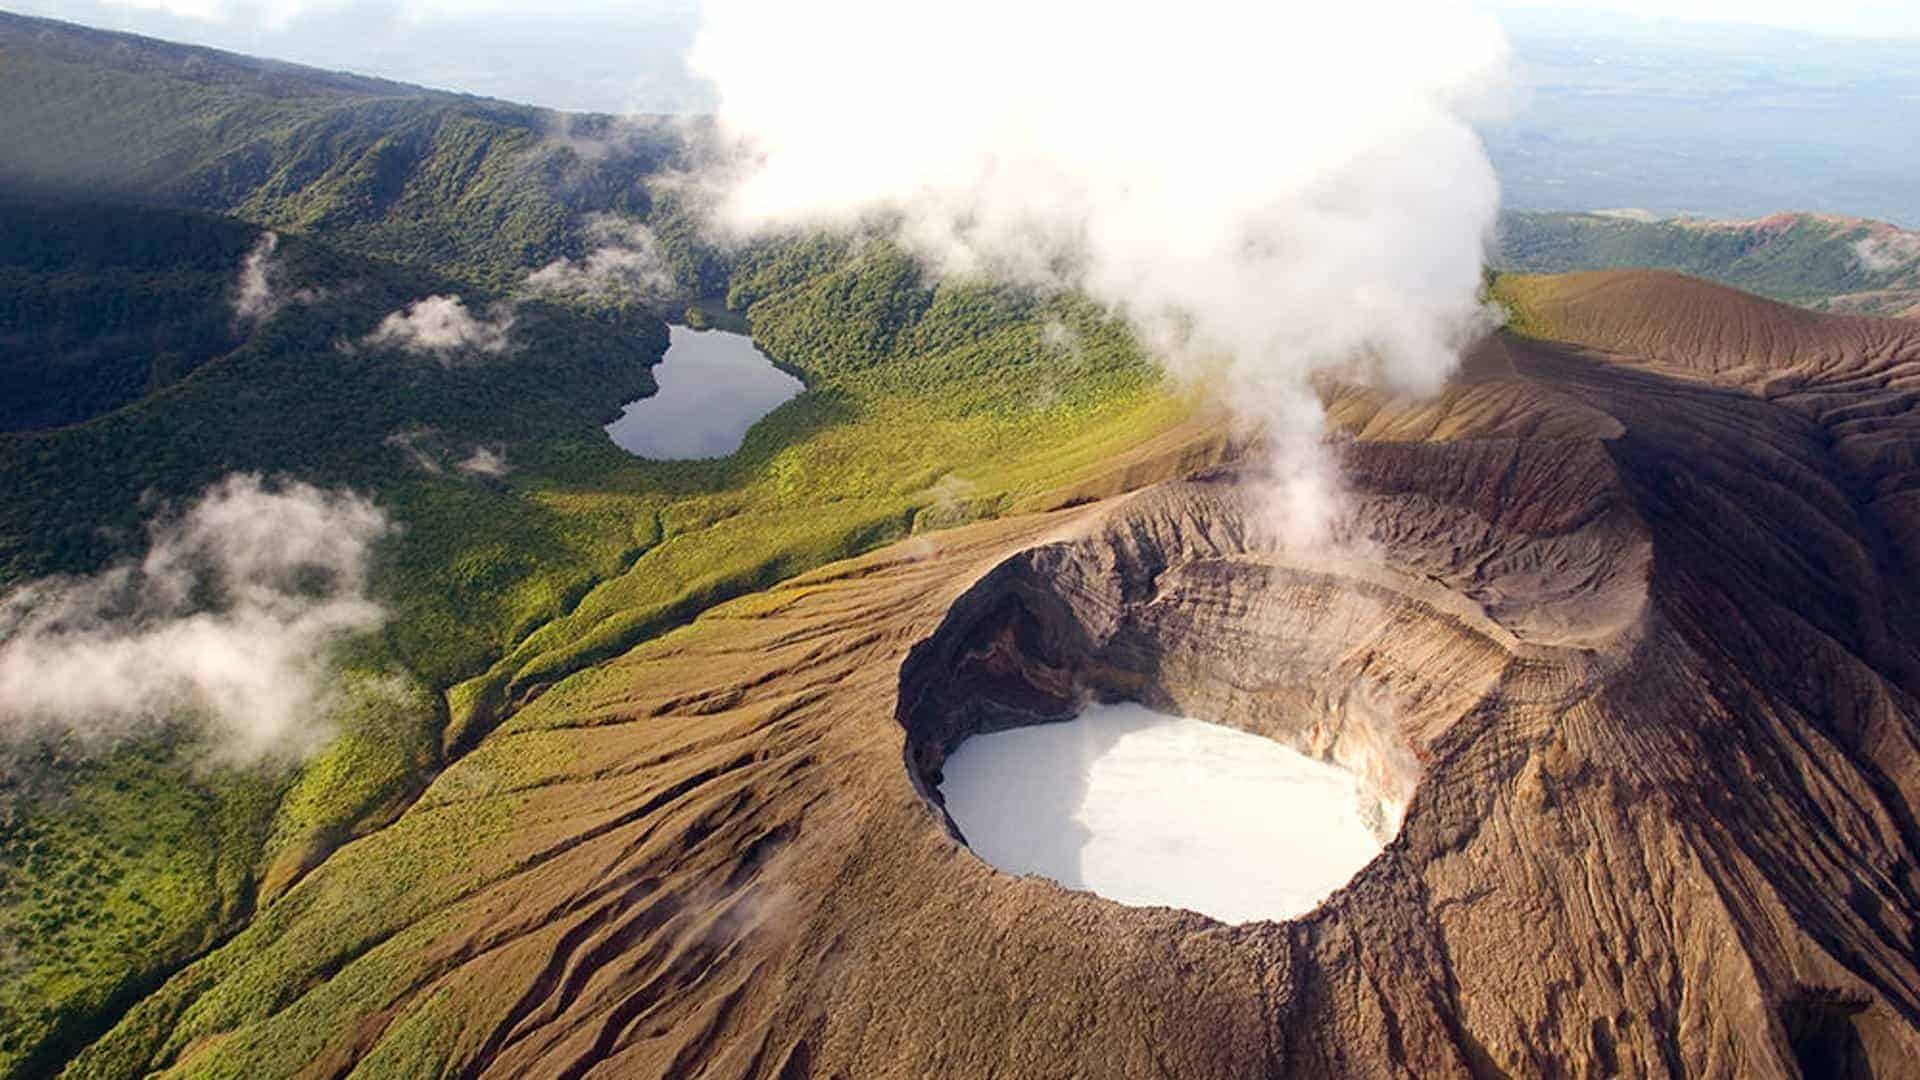 Aerial view of Rincon de la Vieja National Park, featuring the active crater with steam rising from it, a volcanic ash-covered slope, and lush greenery surrounding a calm lake in the volcanic basin.